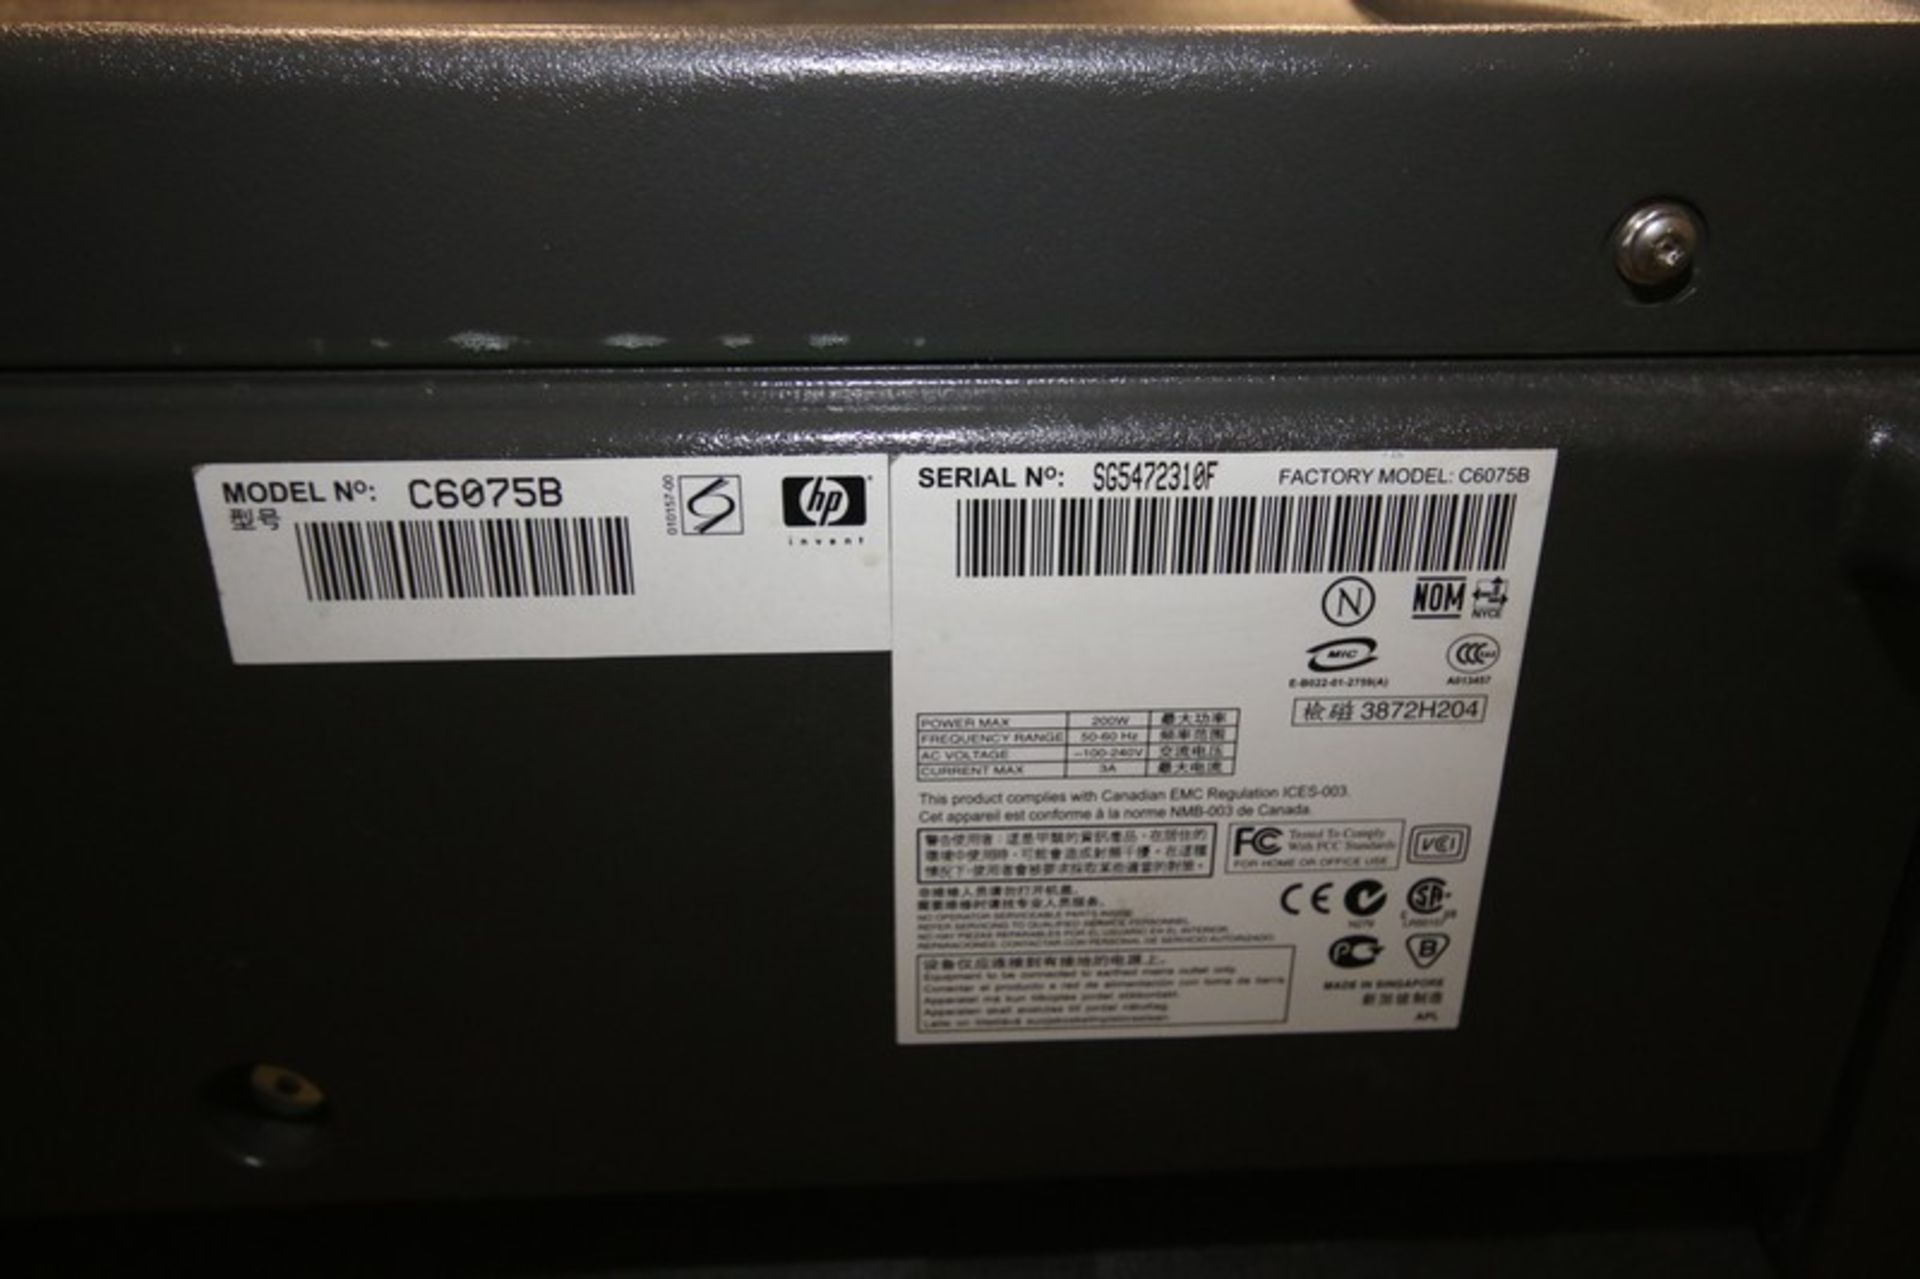 HP Designjet 1055CM Plus, Model C6075B, SN SG5472310F, (INV#69121)(Located at the MDG Auction - Image 3 of 3